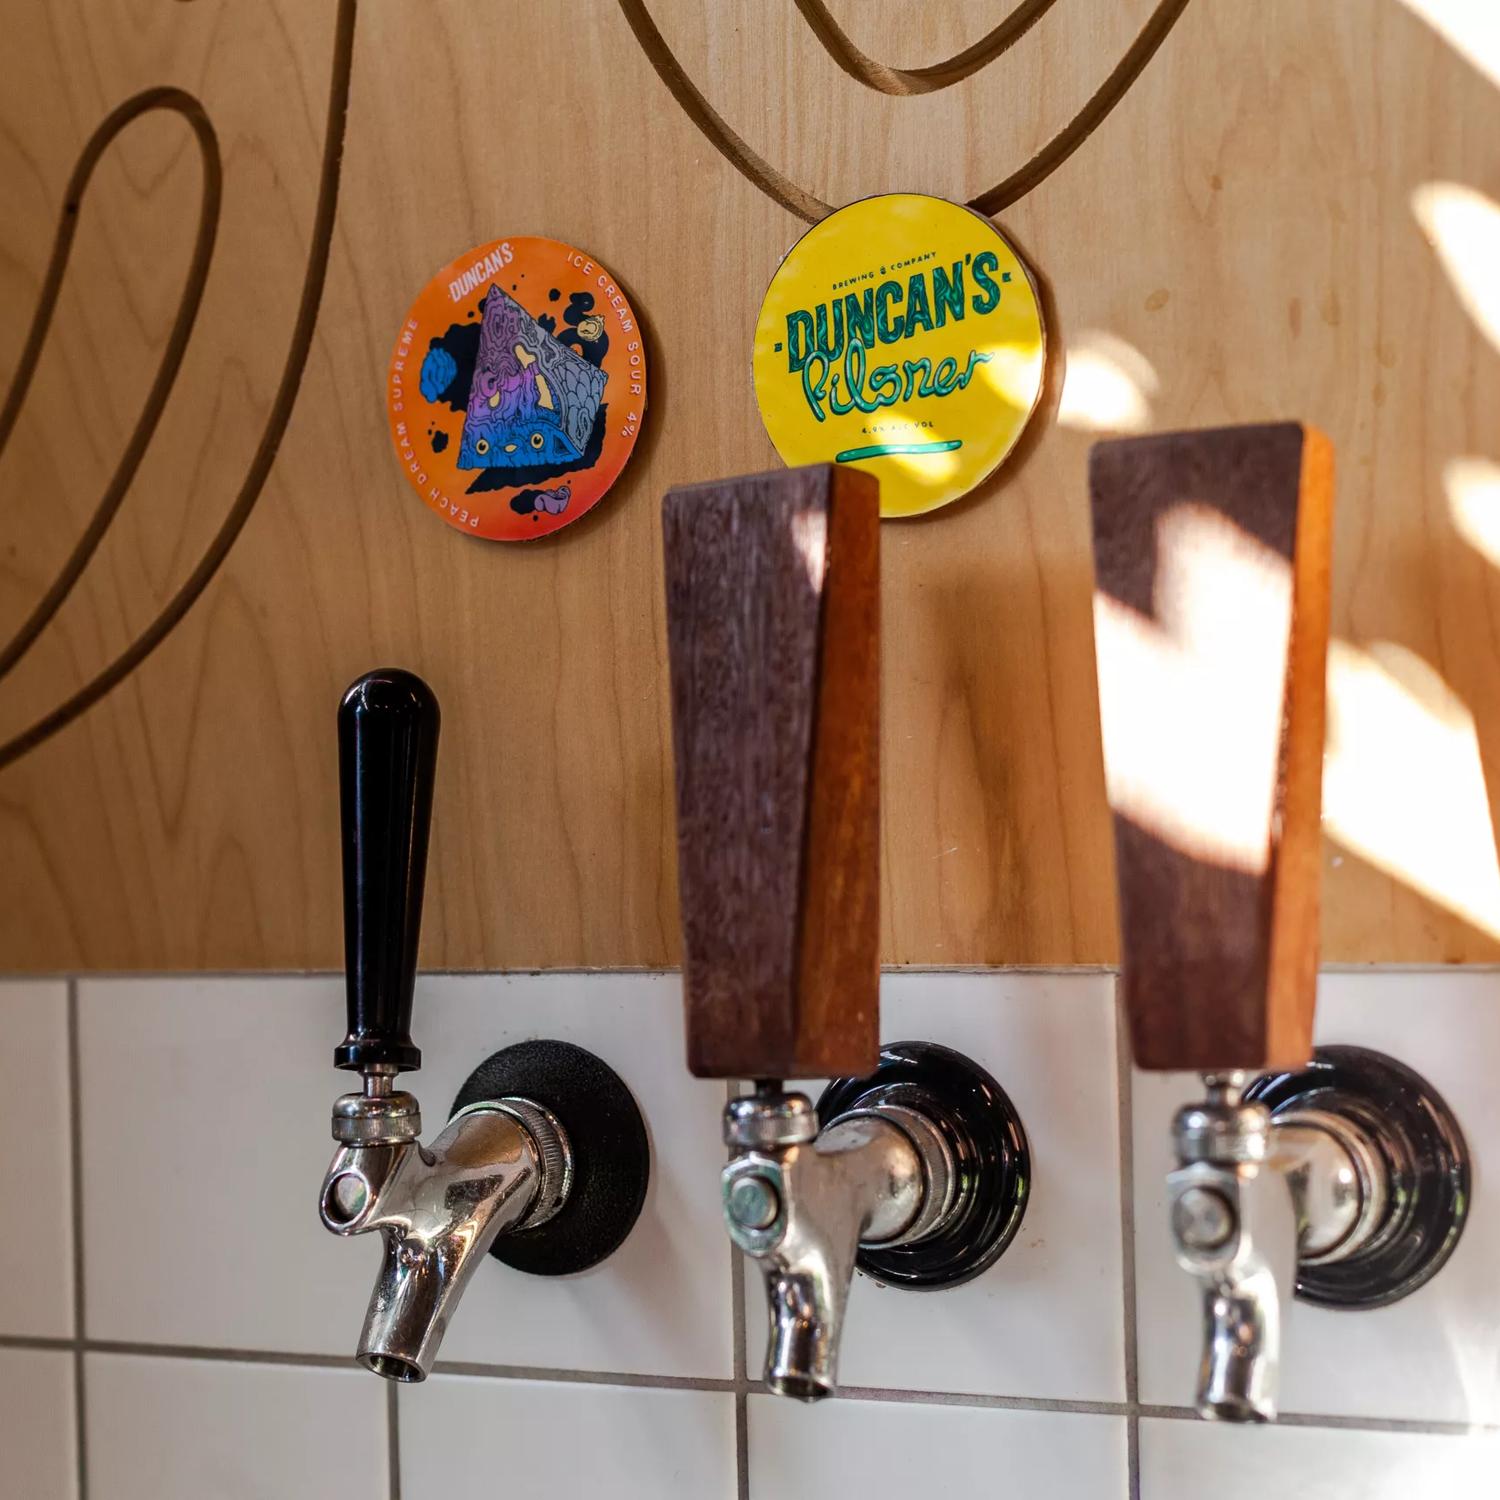 Beer on tap at Duncans Brewery.